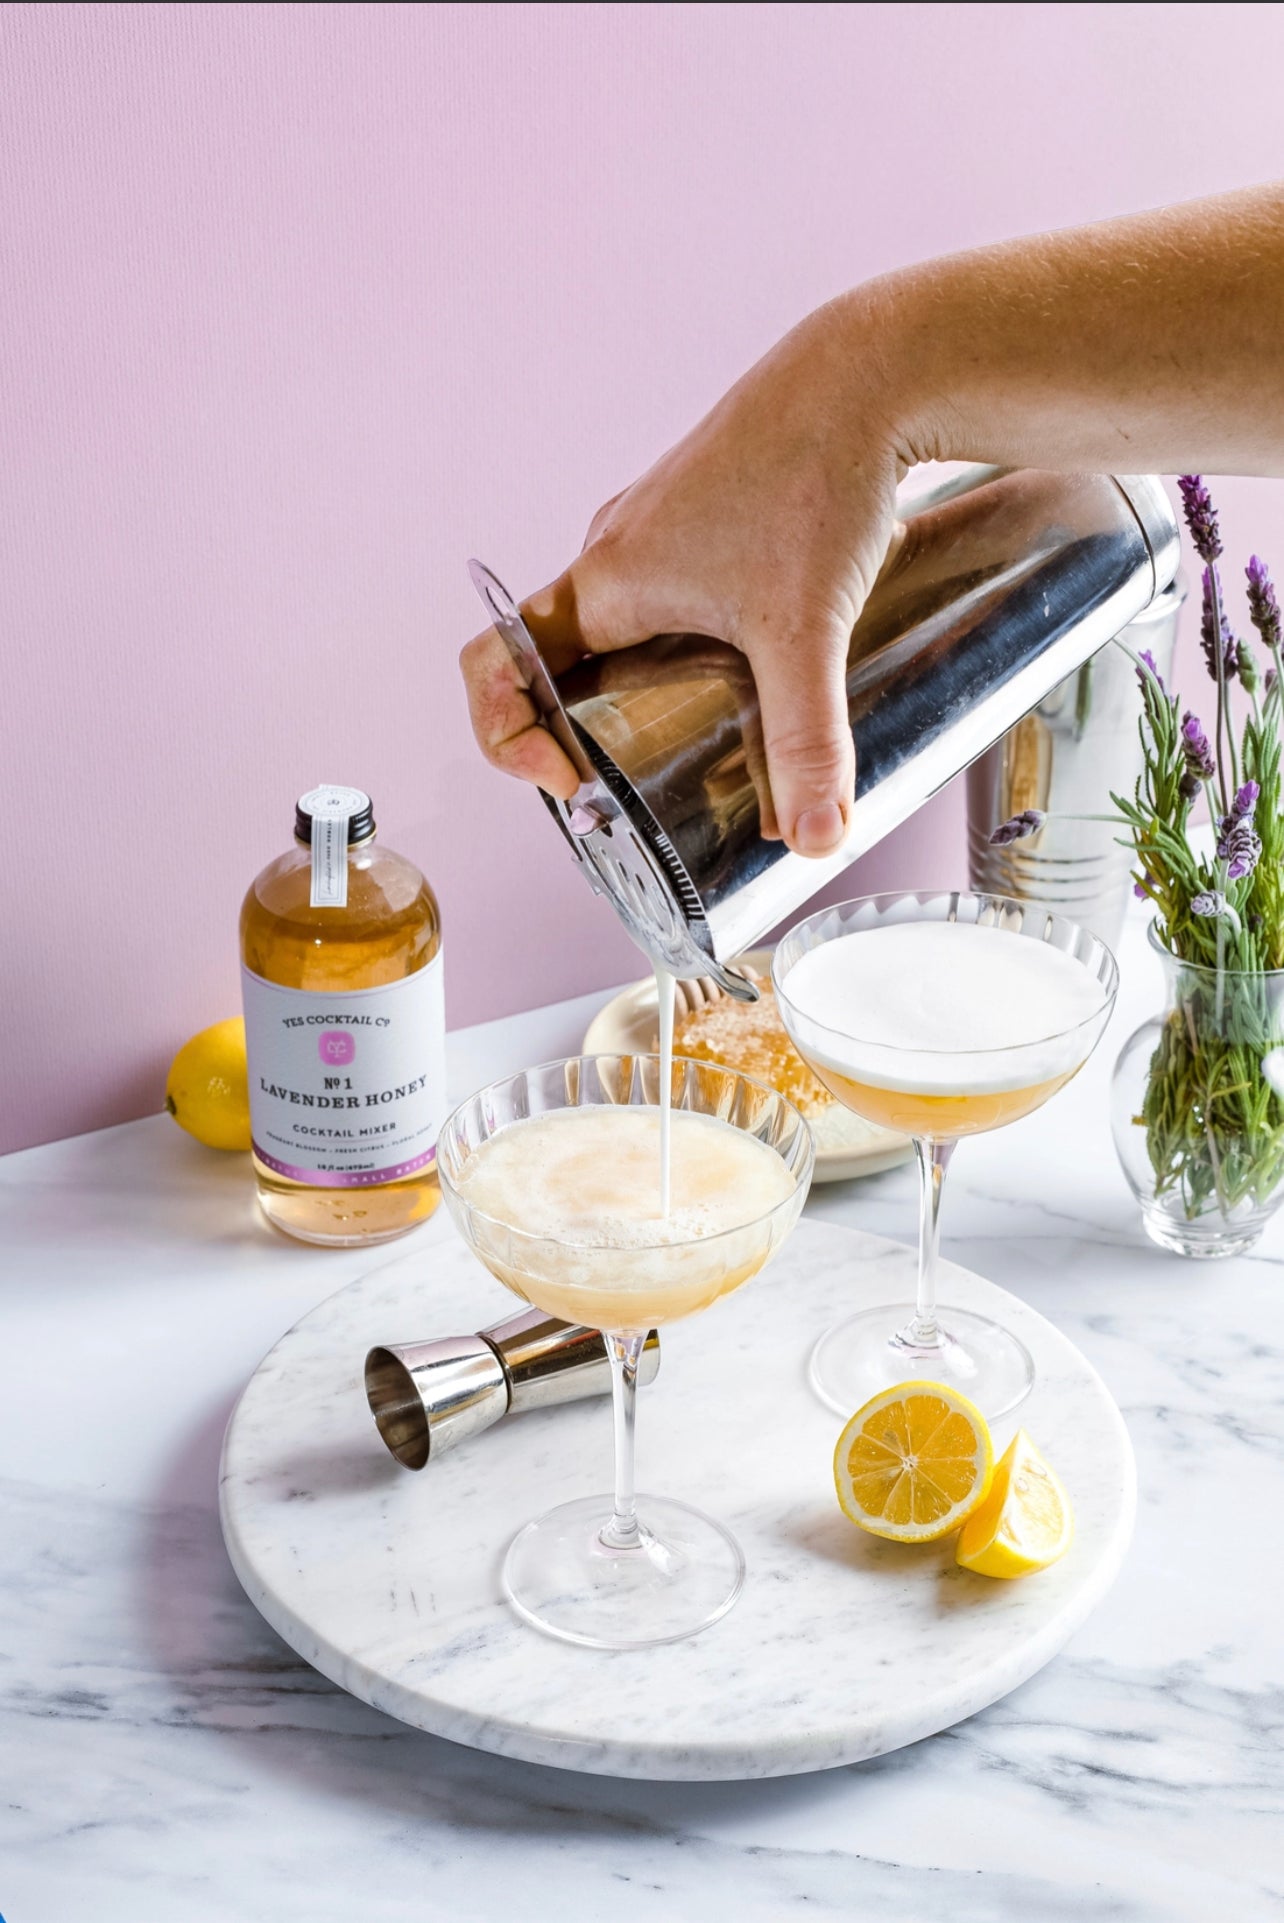 a hand holding a silver cocktail shaker pouring drinks into martinin glasses with the 16 oz bottle of handcrafted Lavendar and Honey Cocktail Mixer made by Yes Cocktail Co in the background